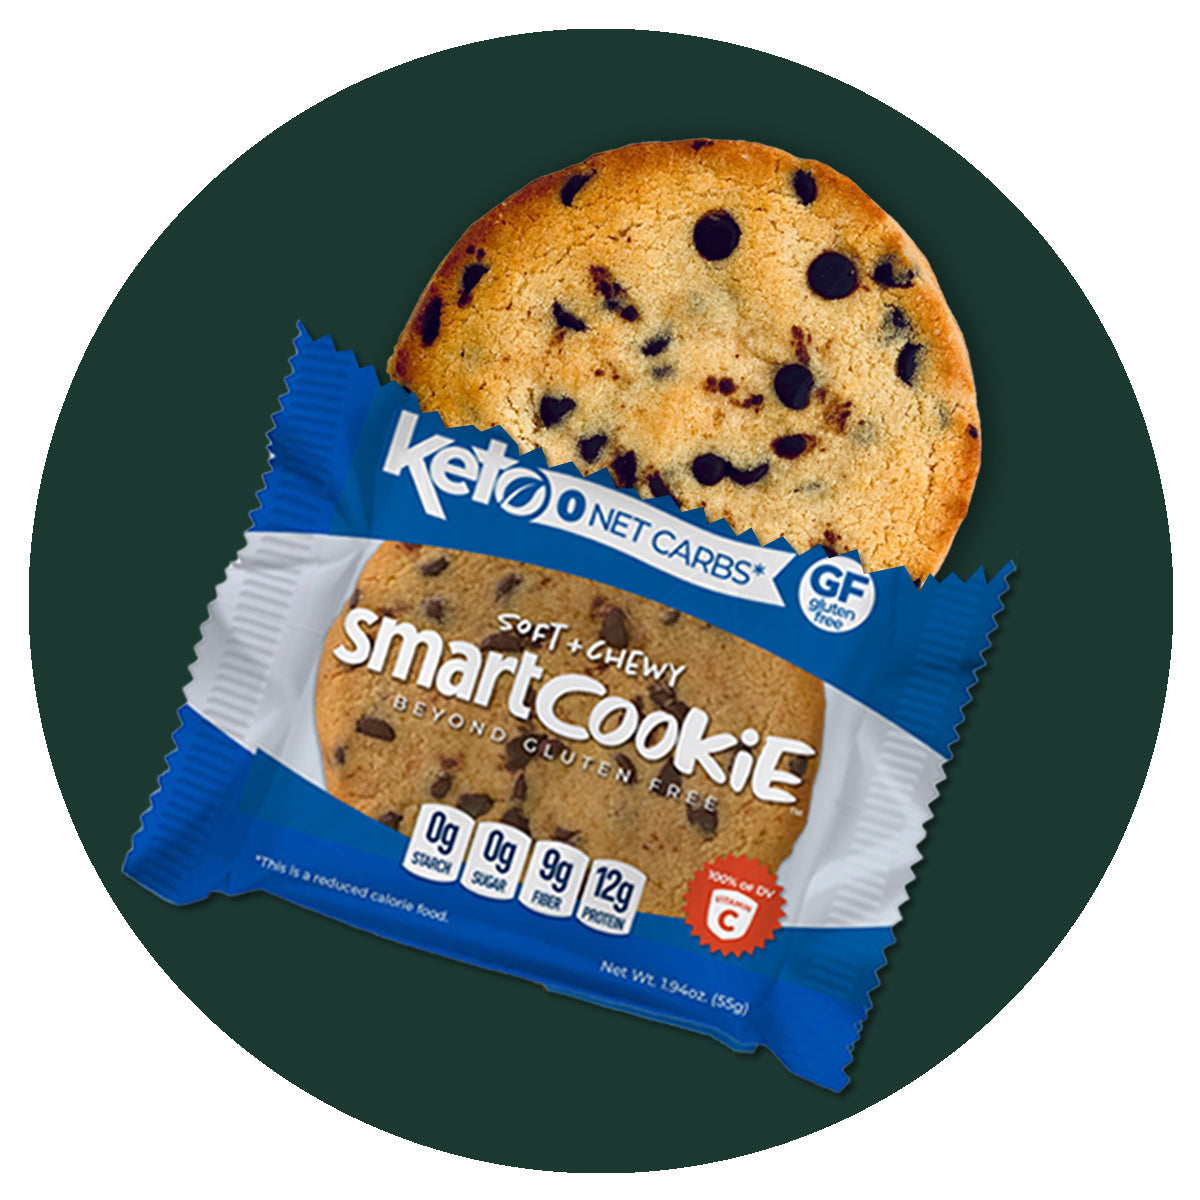 Smart Baking Keto GF Protein SmartCookie 1 cookie BEST BY APRIL 23, 2024 SmartBaking Top Nutrition Canada